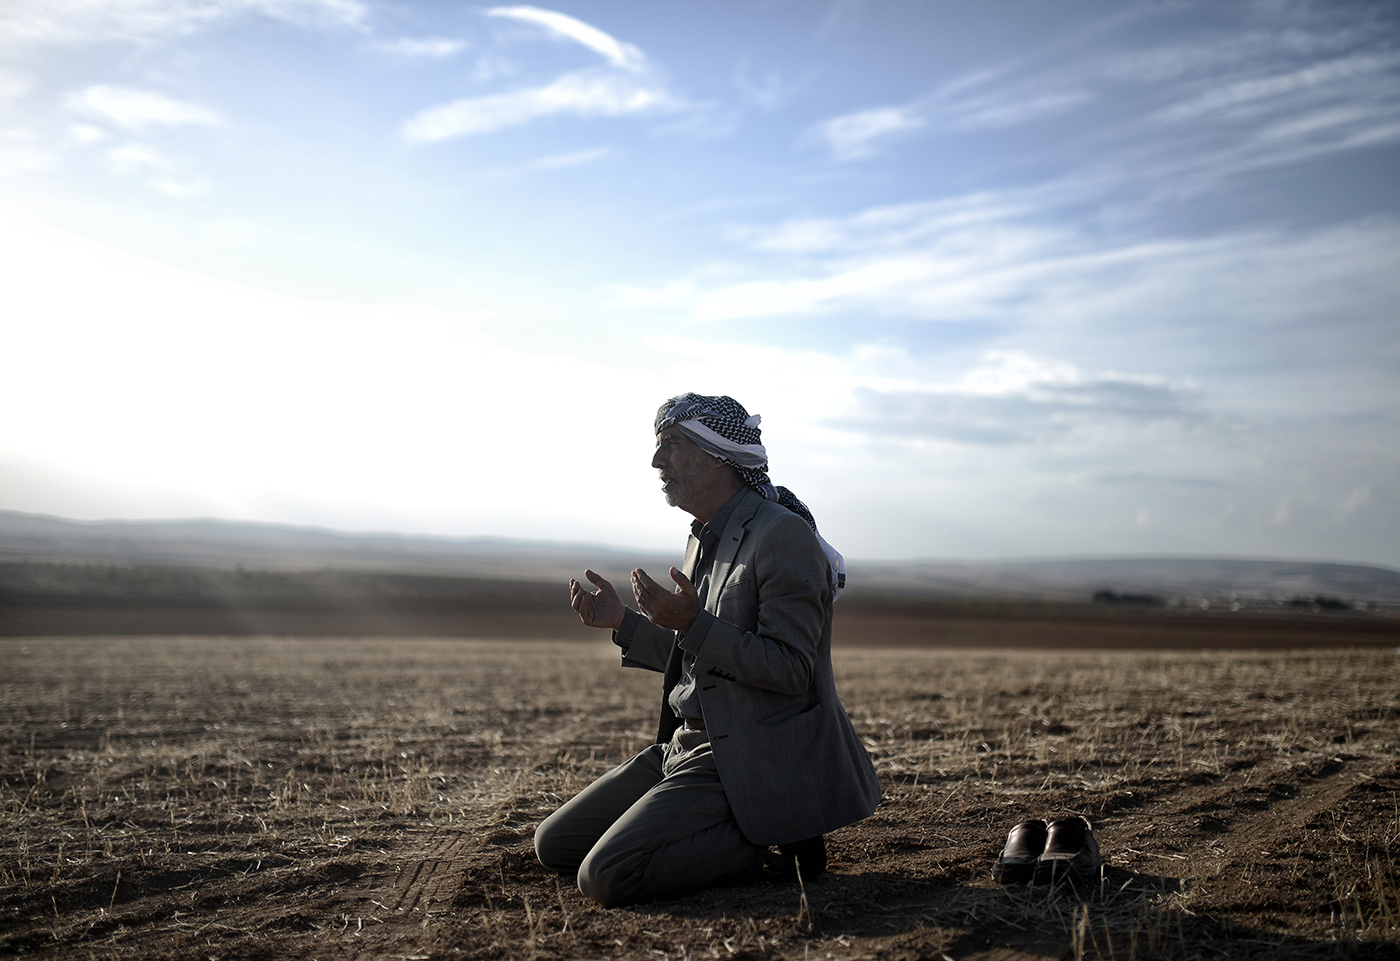 A man pray for Syrian people at the Kobane as he watch xplosion after an apparent US-led coalition airstrike on Kobane, Syria, as seen from the Turkish side of the border, near Suruc district, Sanliurfa, Turkey, 26 October 2014.